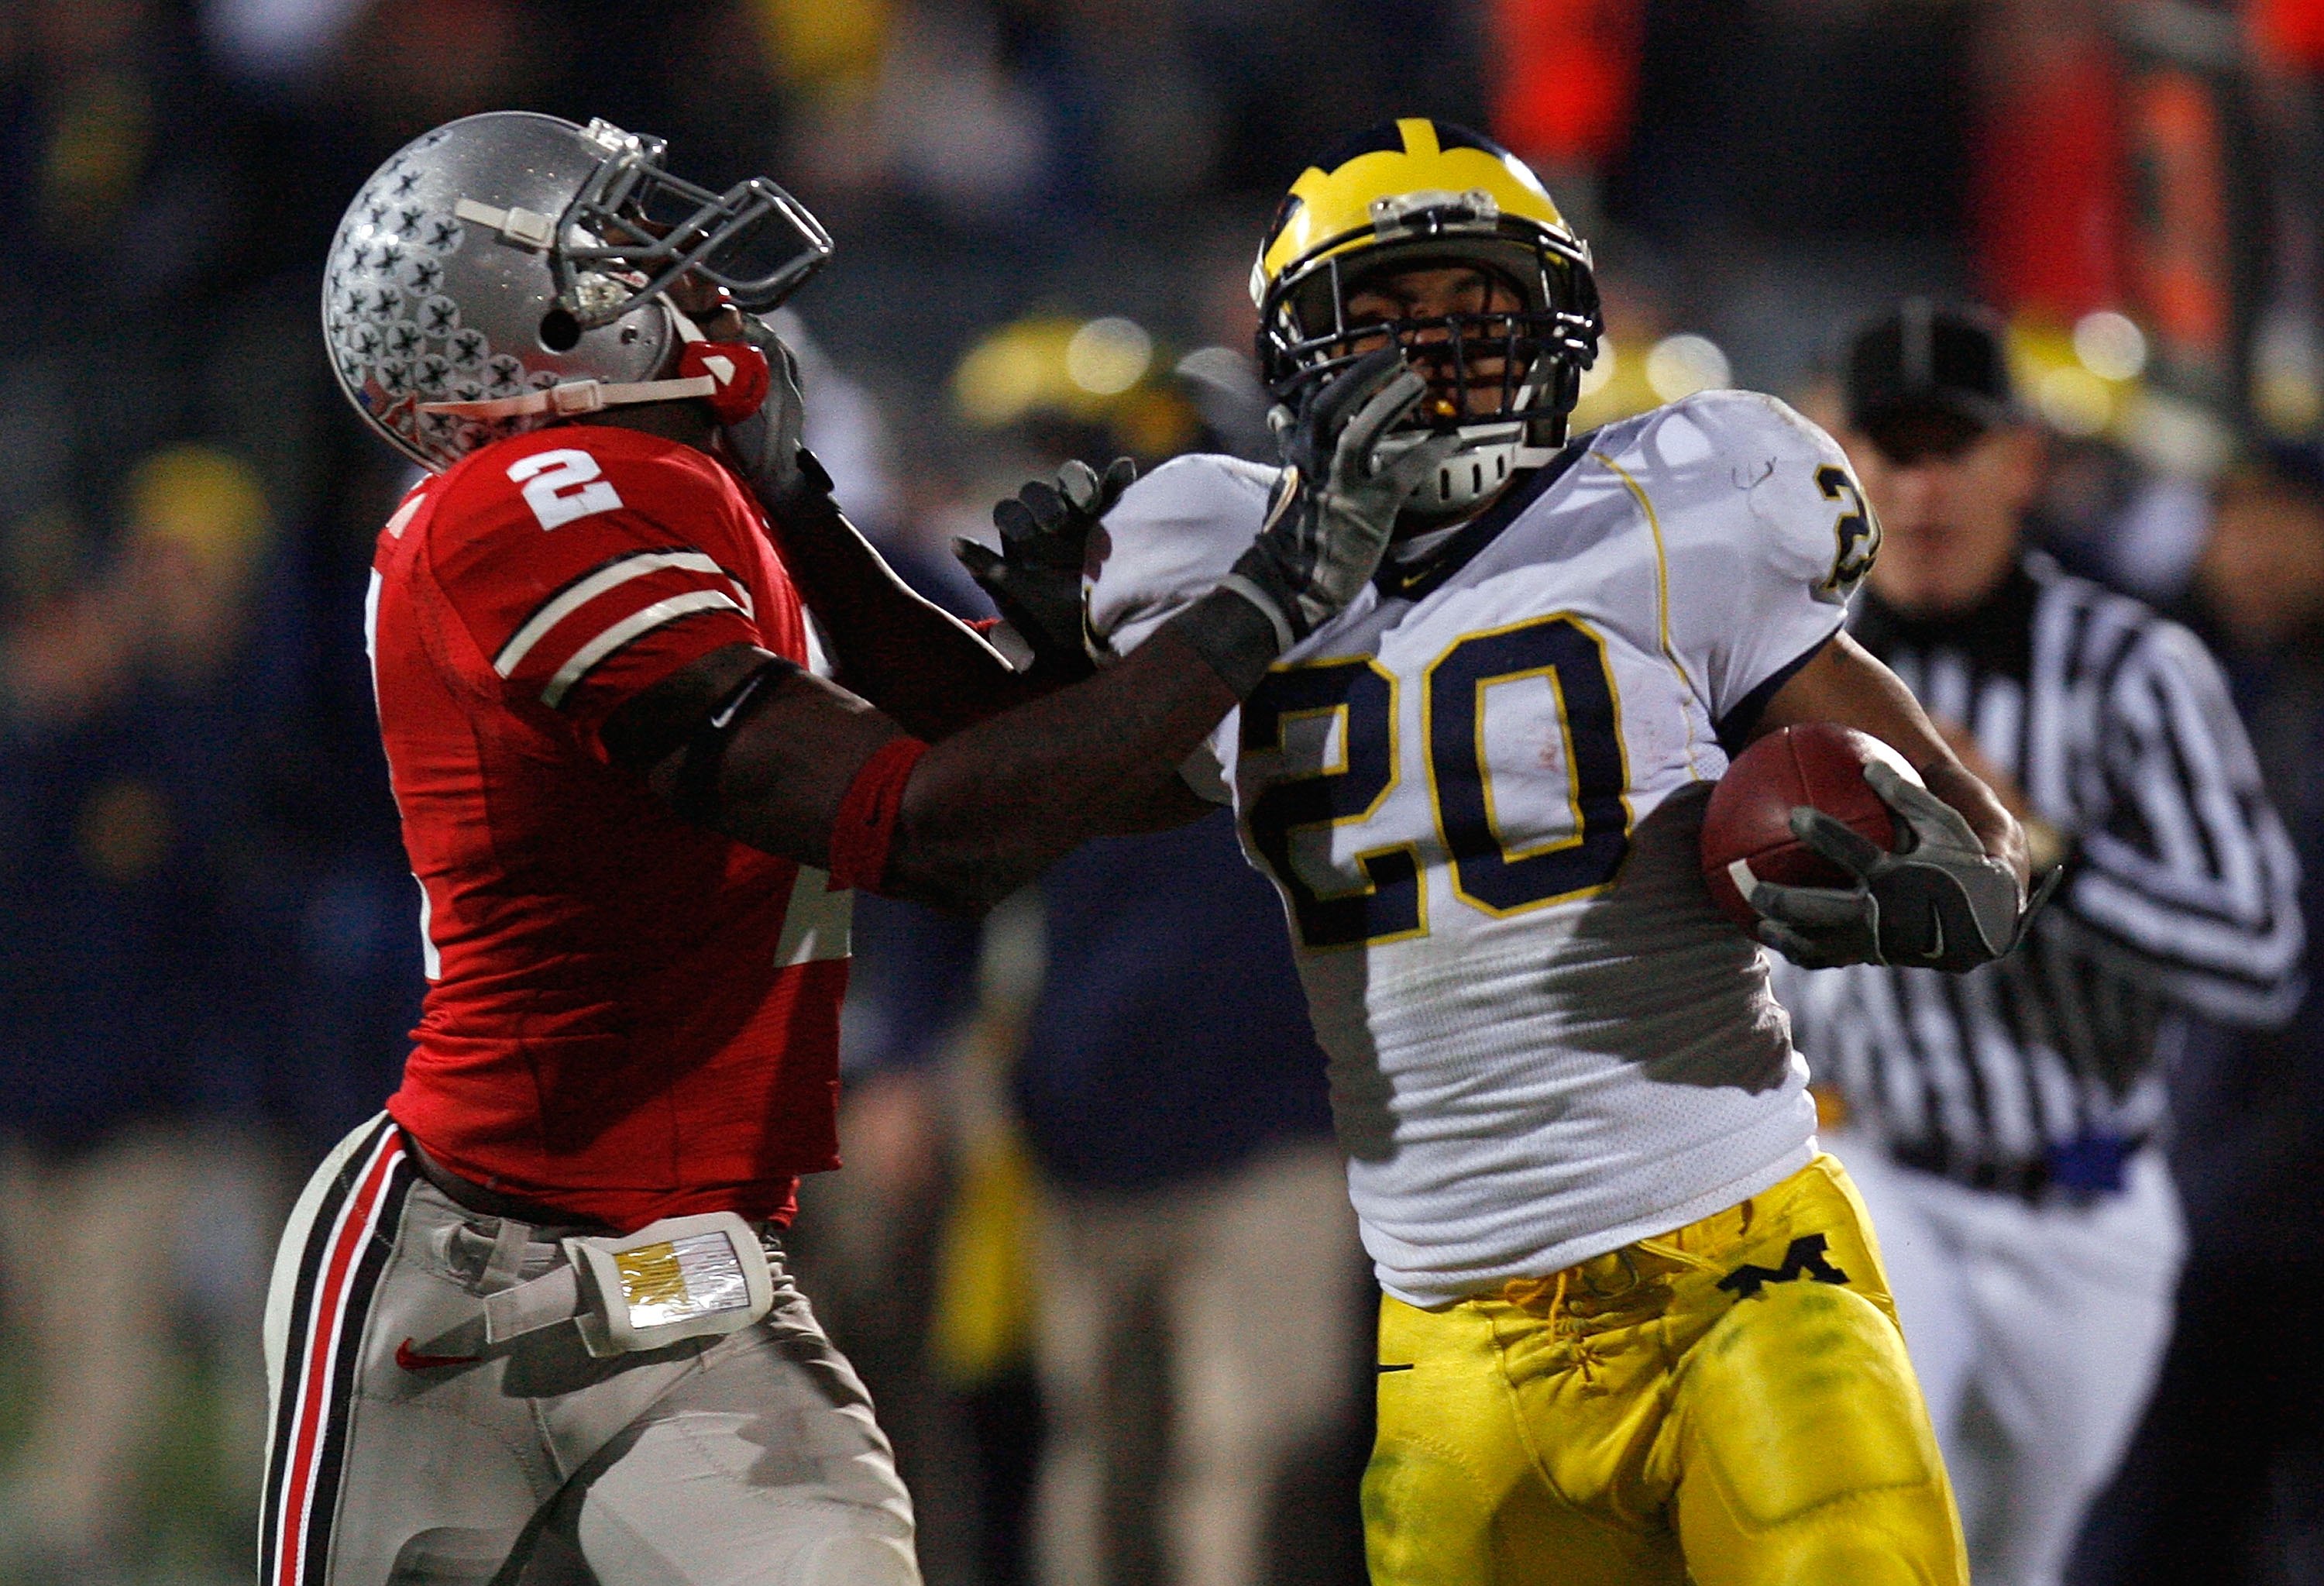 COLUMBUS, OH - NOVEMBER 18:  Mike Hart #20 of the Michigan Wolverines stiff arms Malcolm Jenkins #2 of the Ohio State Buckeyes in the third quarter November 18, 2006 at Ohio Stadium in Columbus, Ohio.  (Photo by Gregory Shamus/Getty Images)